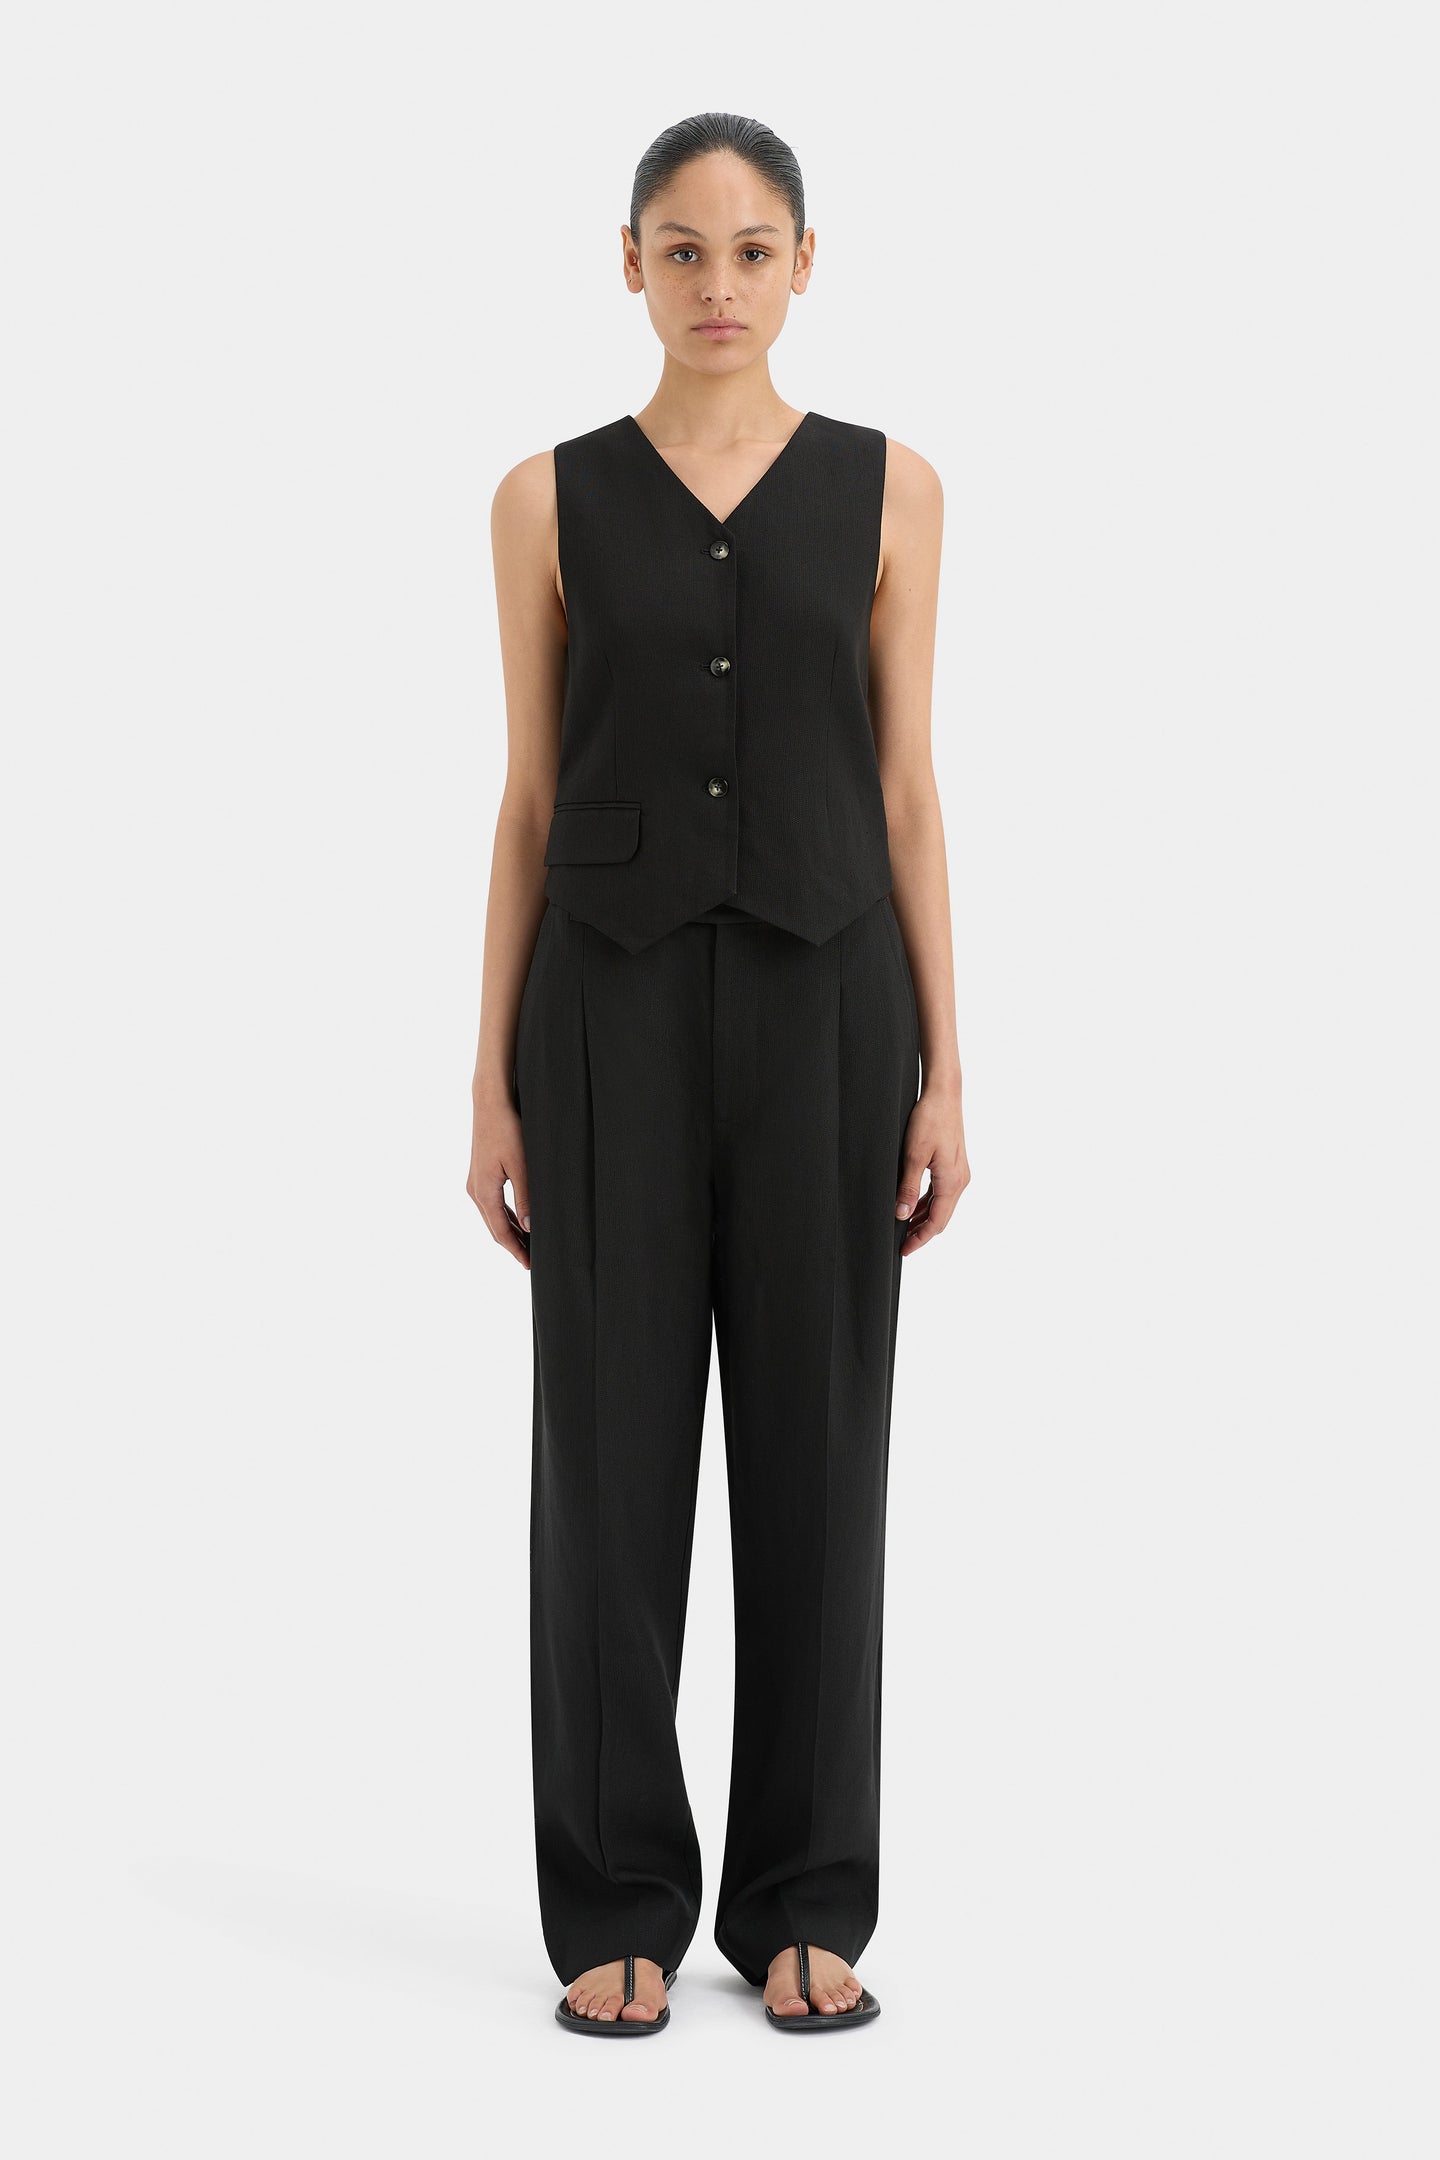 SIR the label Clemence Tailored Vest BLACK